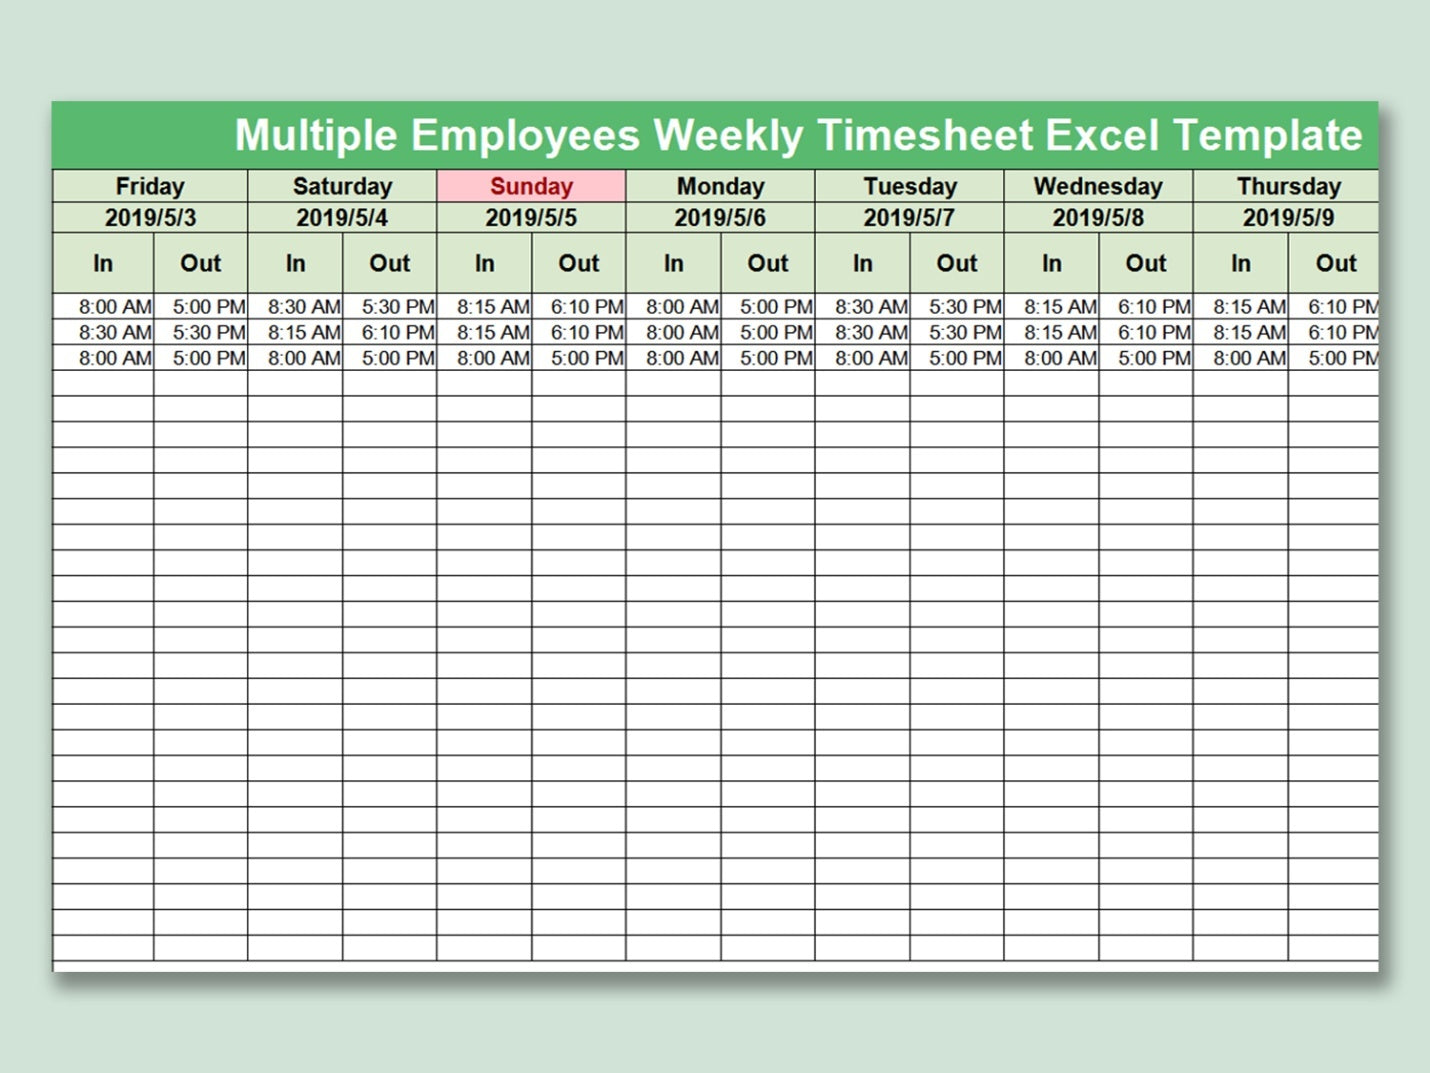 Does Excel Have a Timesheet Template?